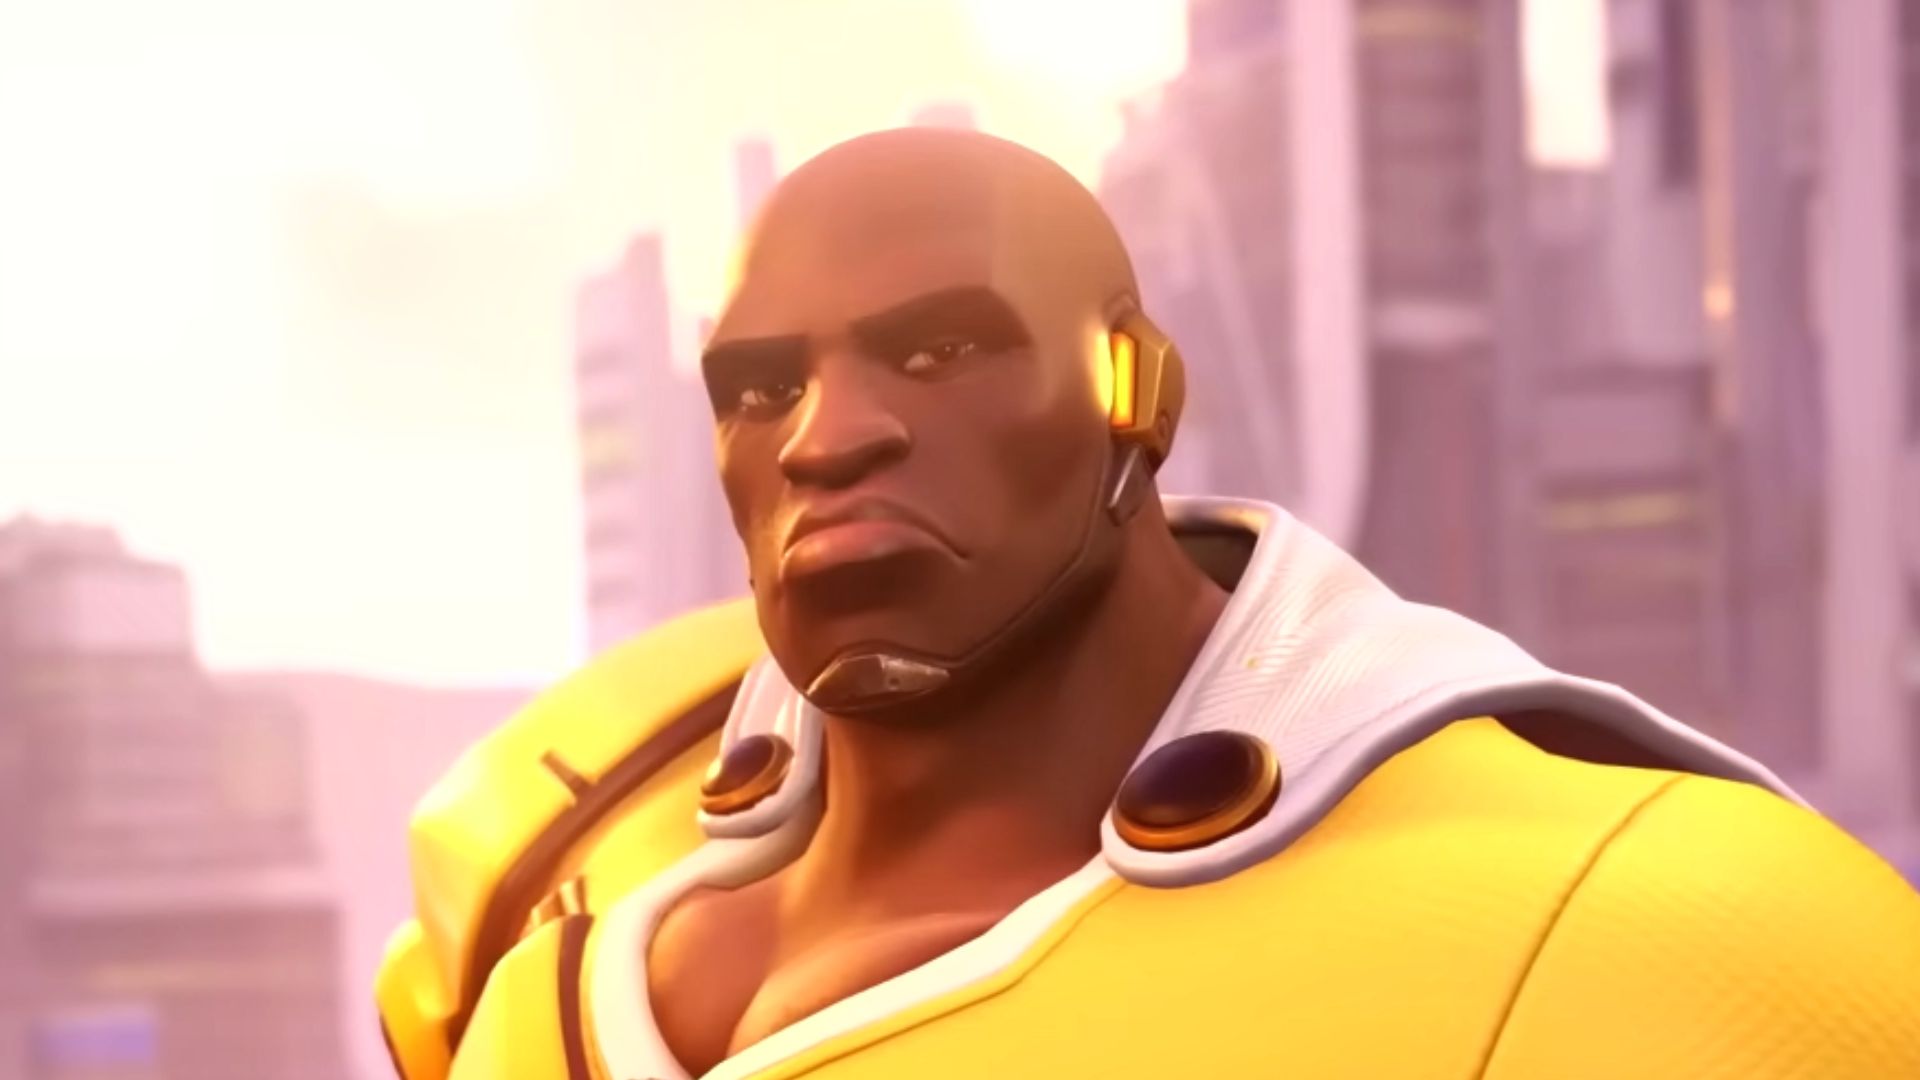 Overwatch 2 is getting a dating sim and a One Punch Man crossover in Season  3